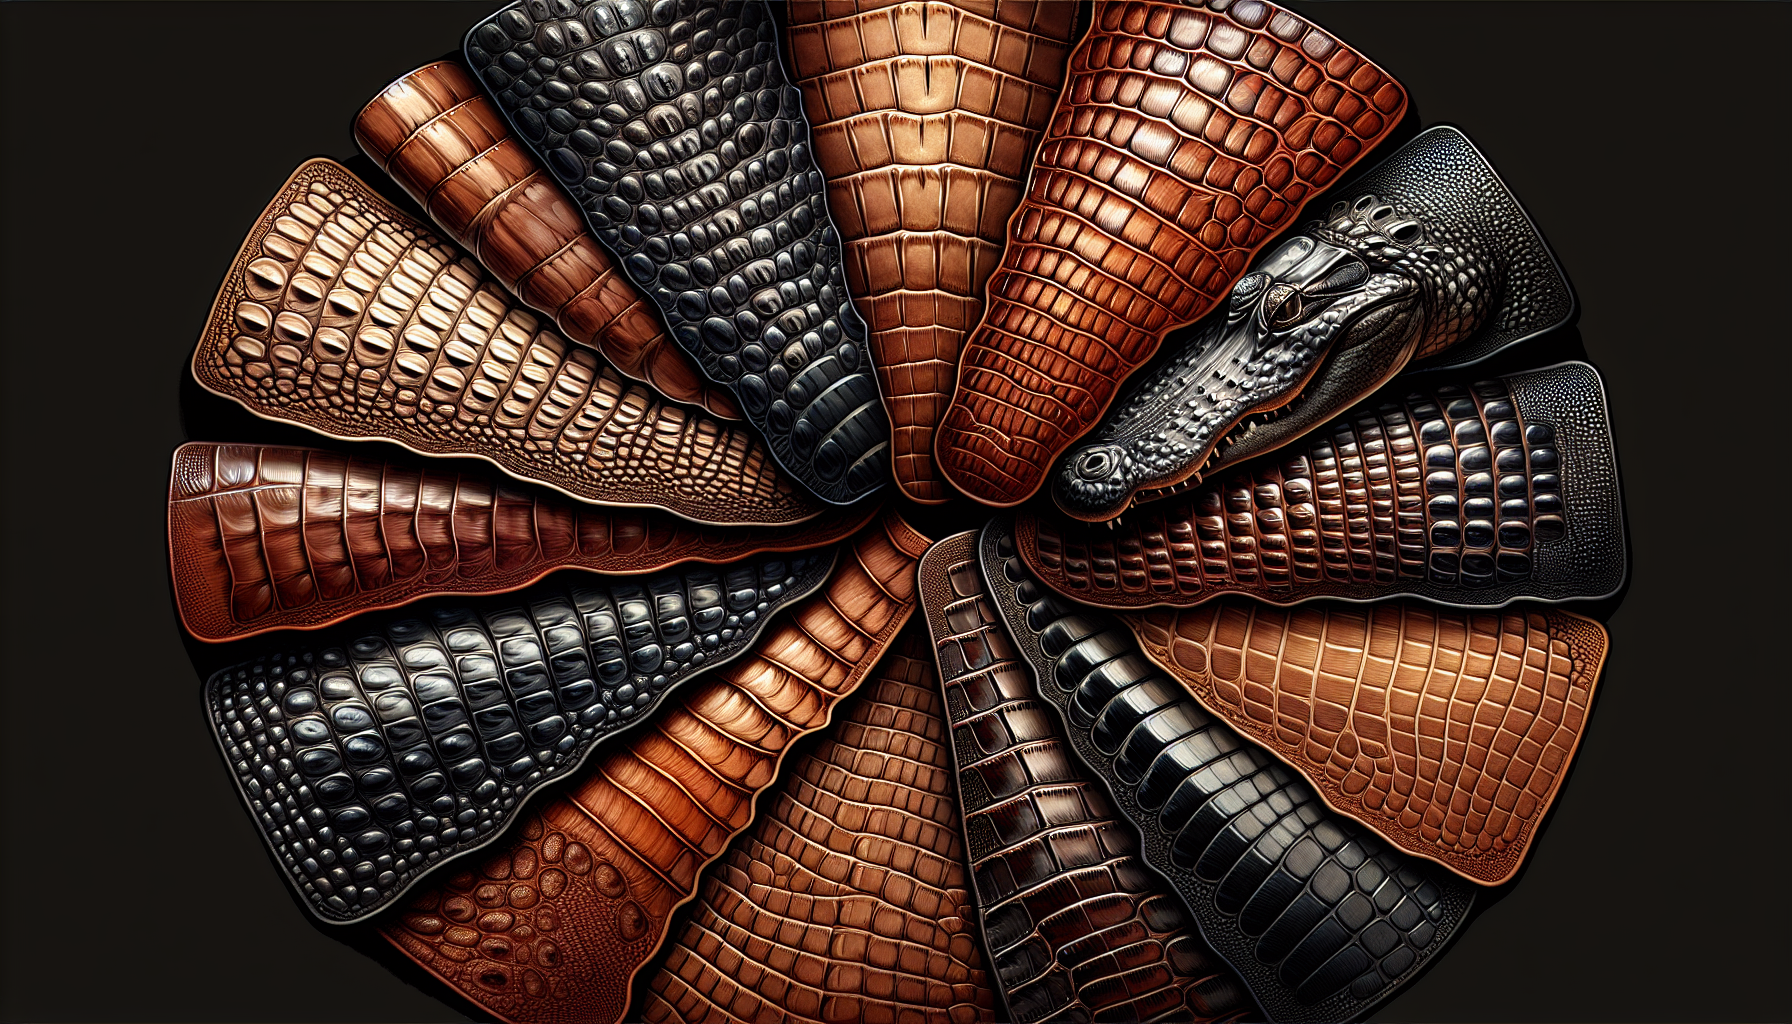 Selection of premium alligator leather with distinct scale patterns